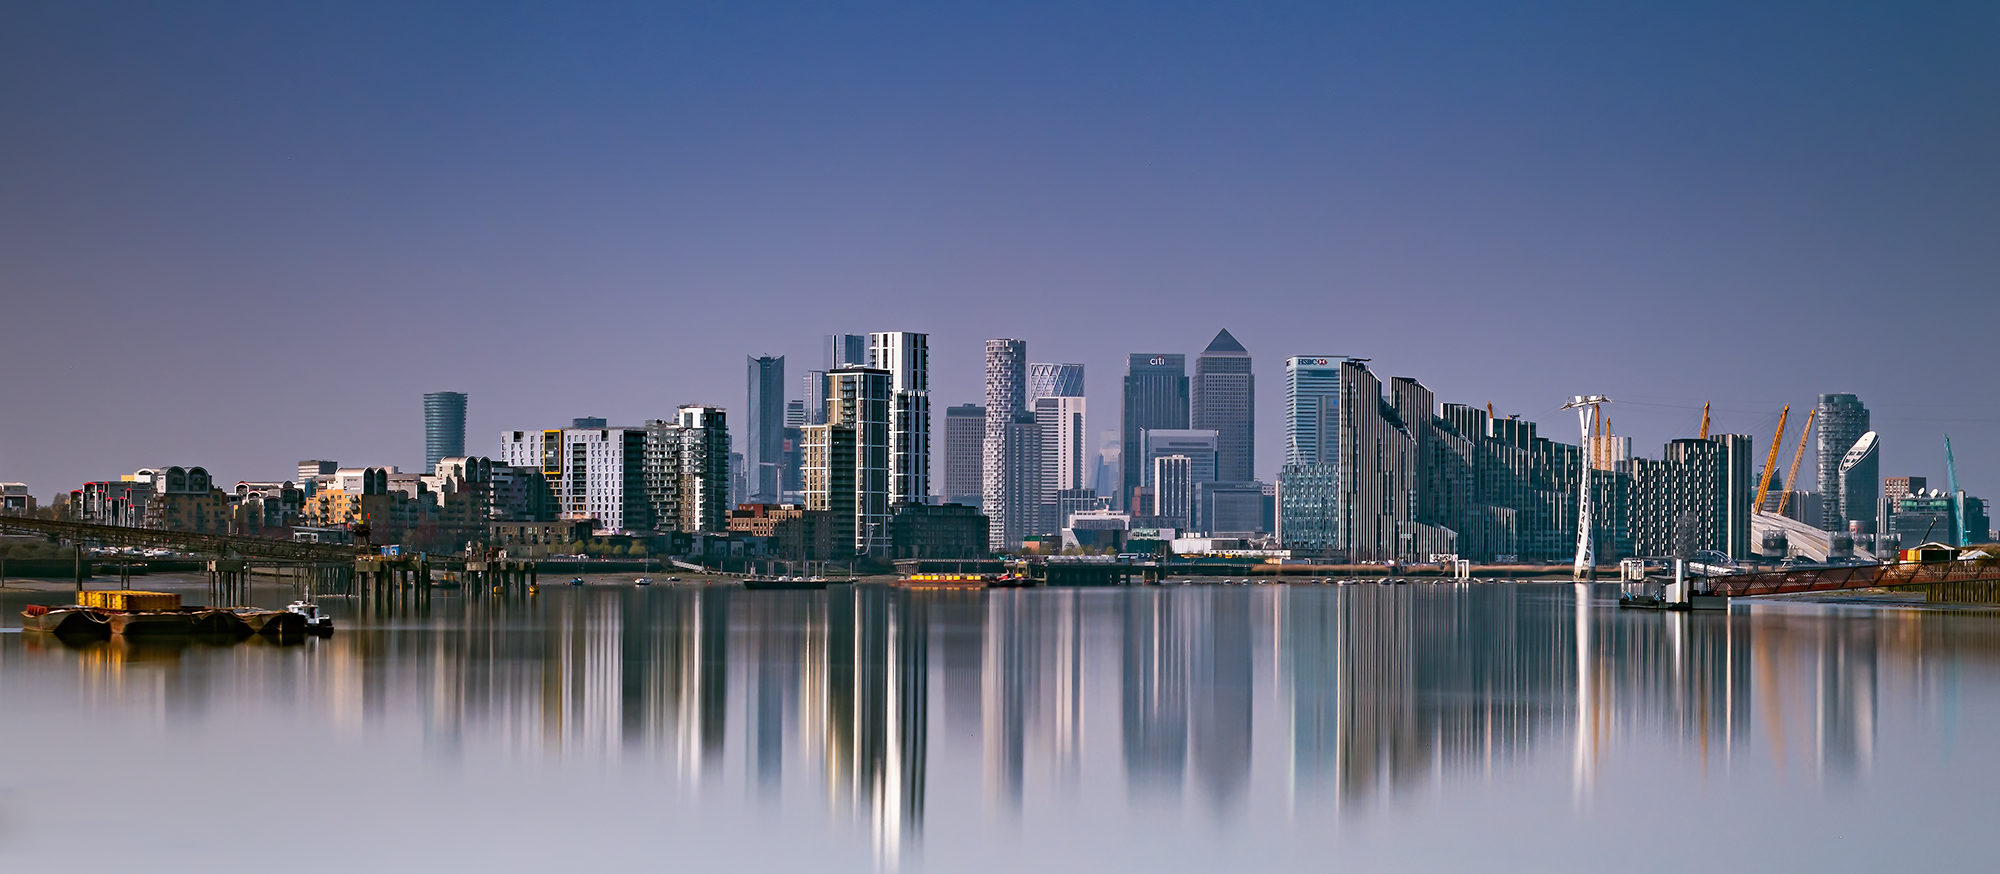 Isle Of Dogs By Peter Benson ARPS